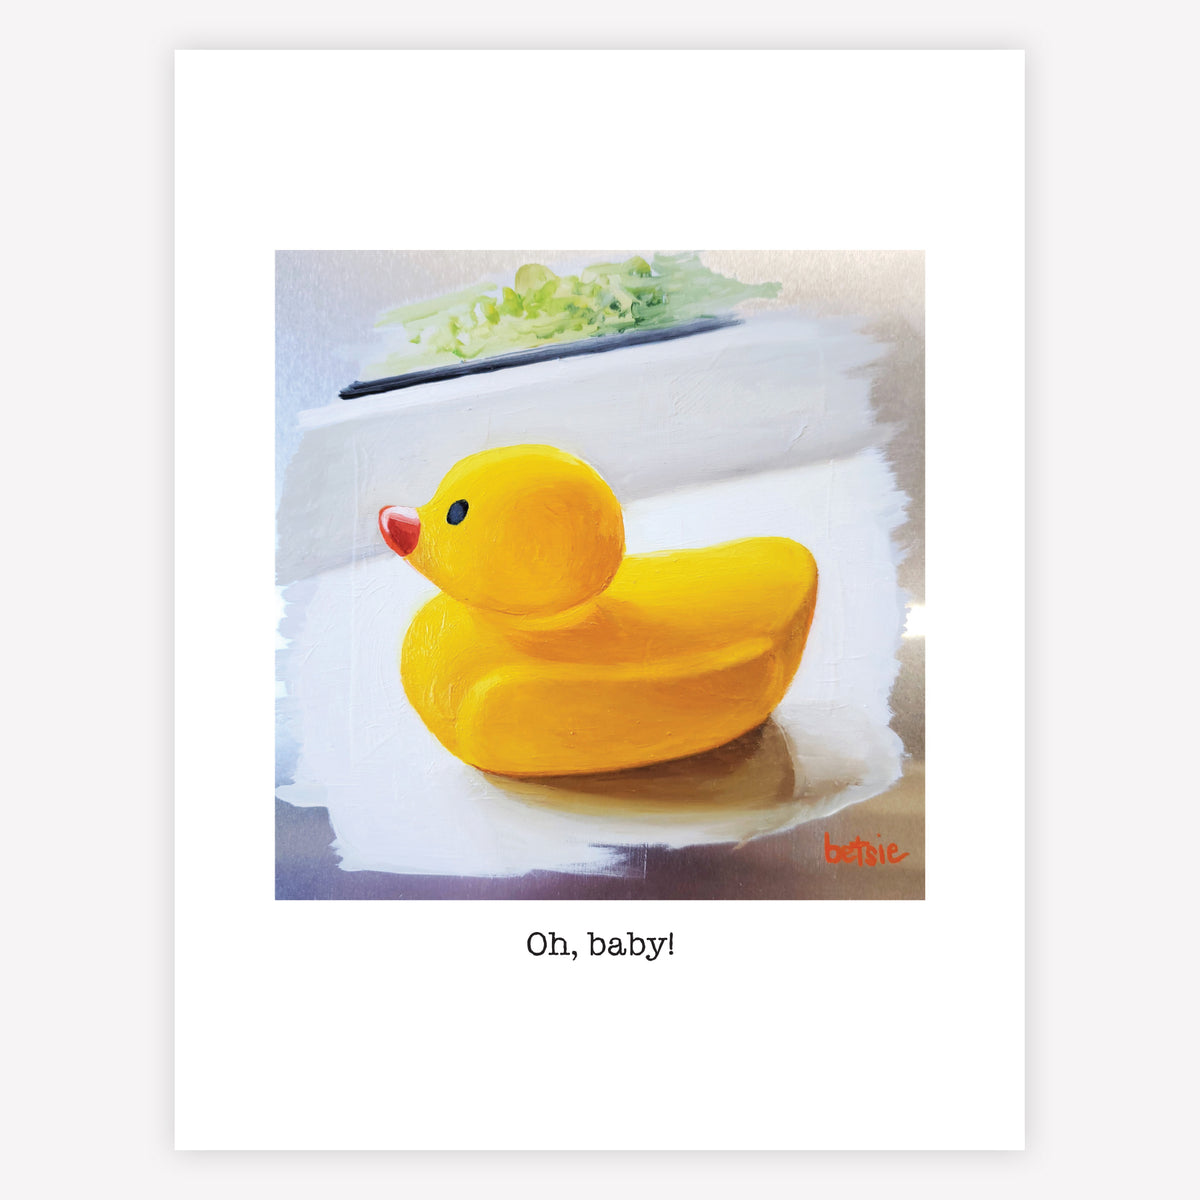 "Oh, baby!" Greeting Card